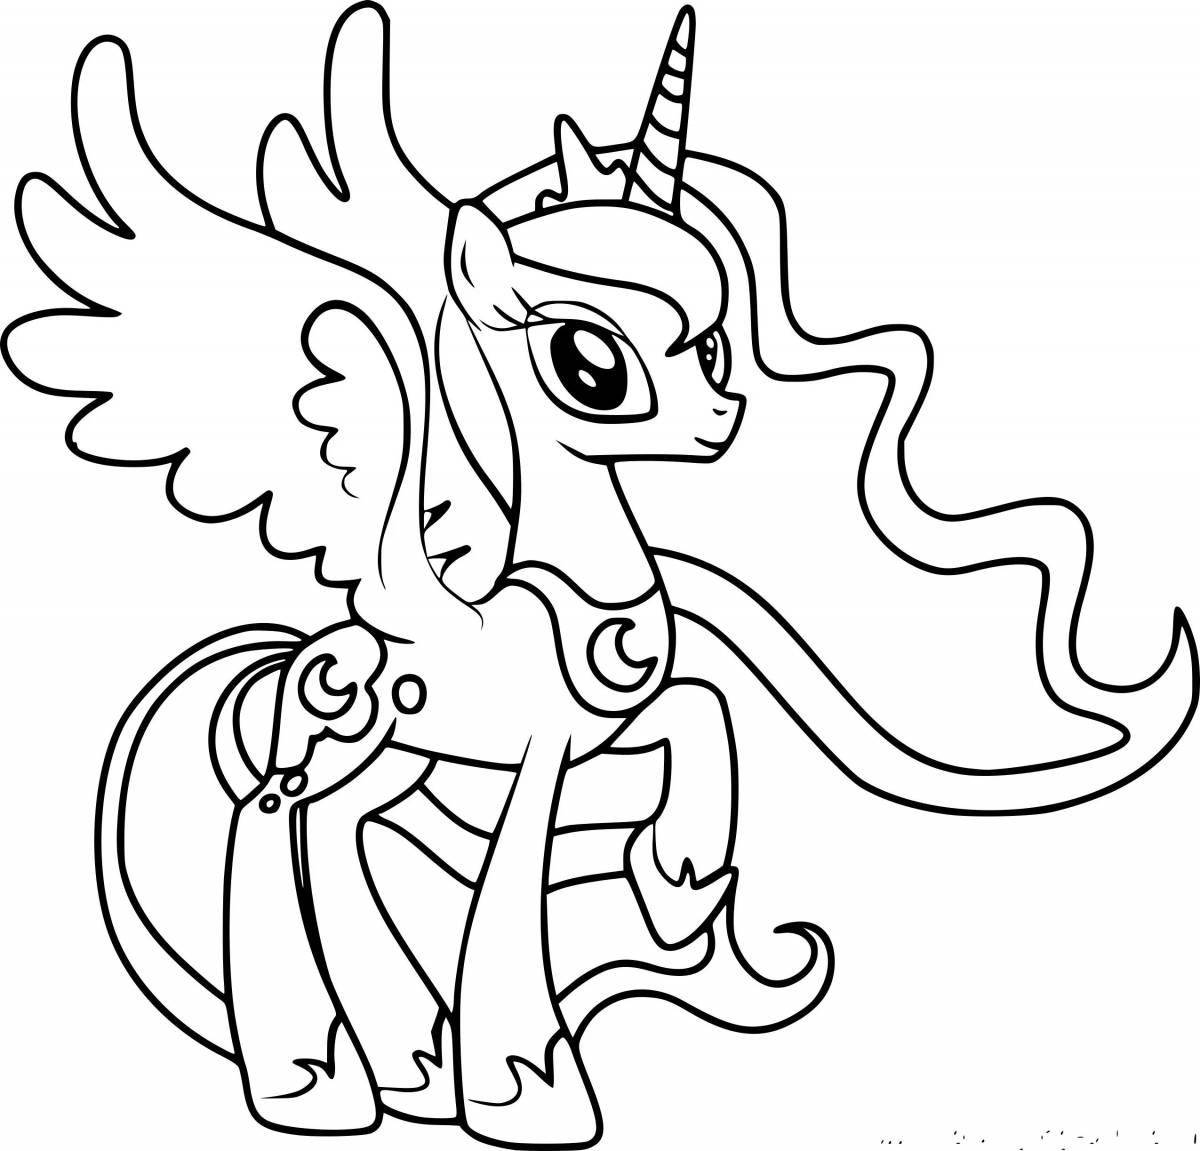 Exquisite unicorn pony coloring for girls